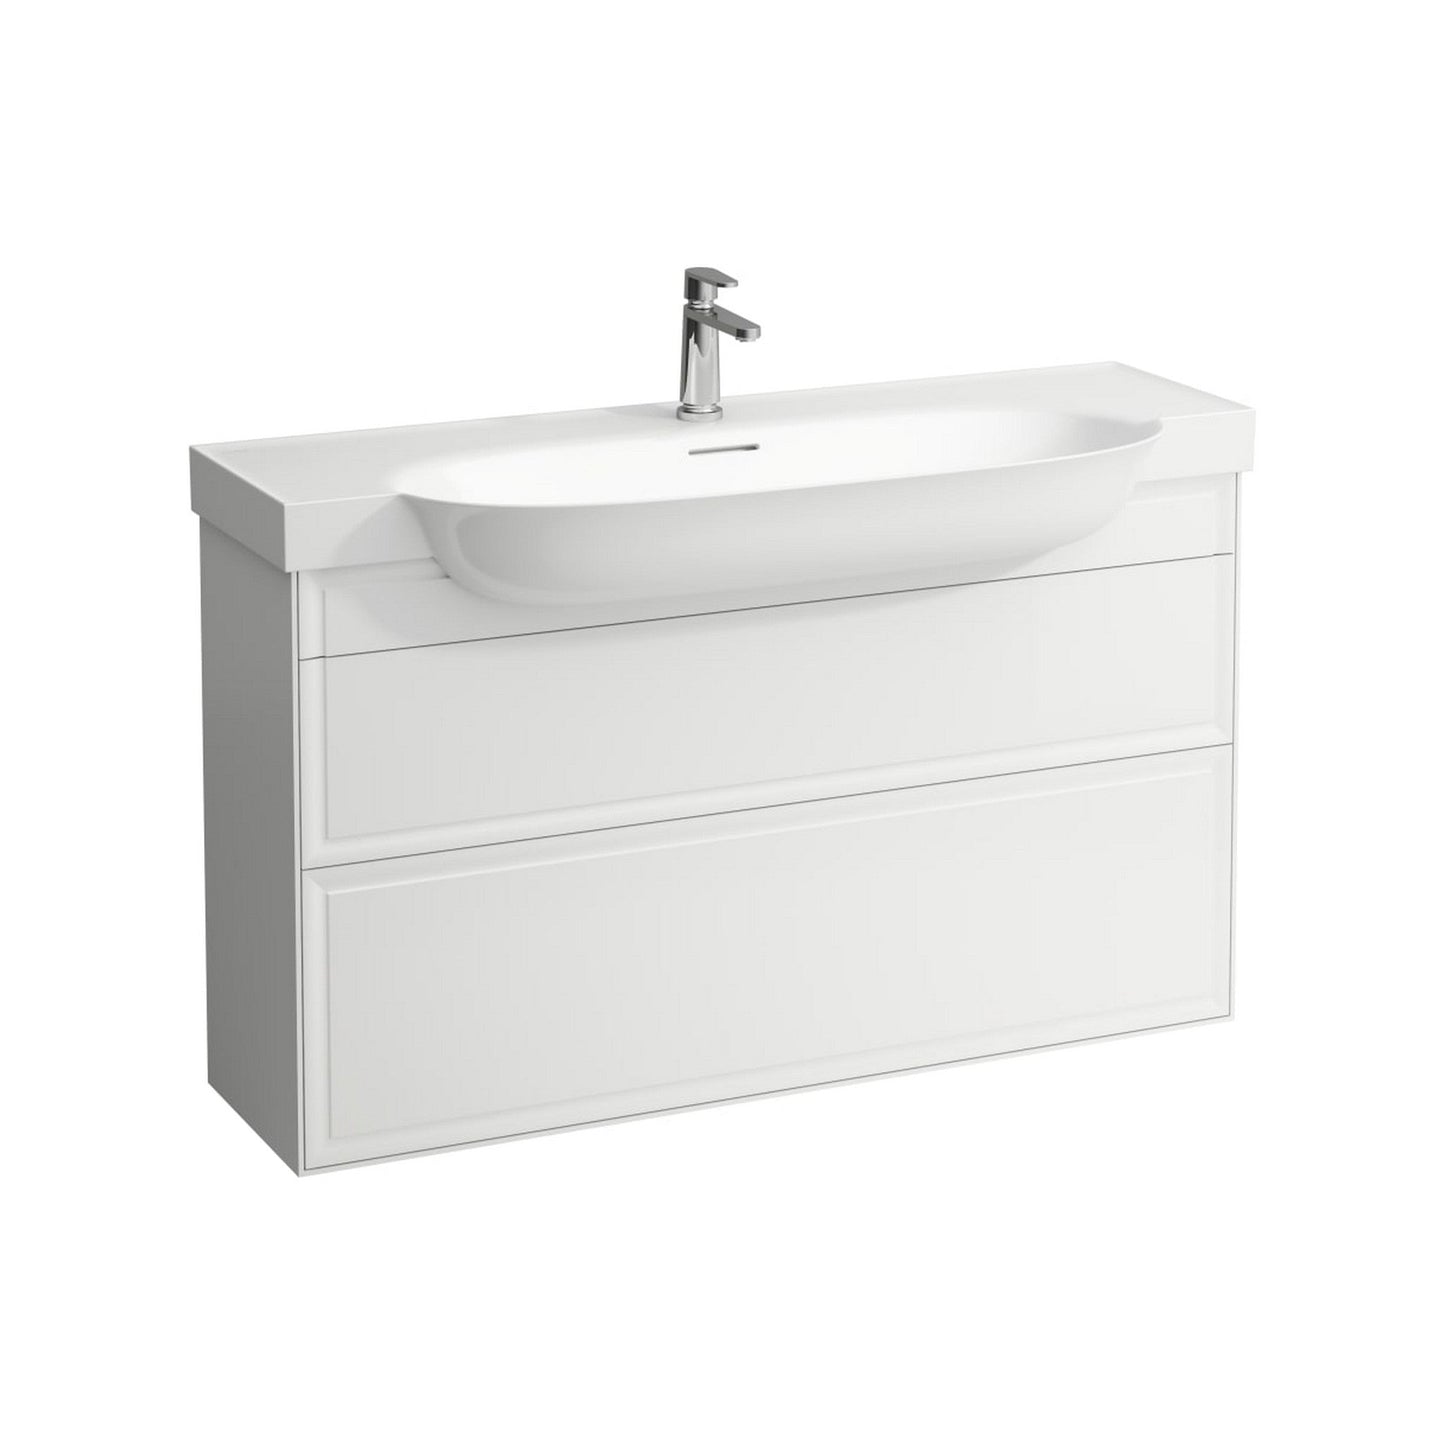 Laufen New Classic 46" 2-Drawer White Wall-Mounted Vanity for New Classic Bathroom Sink Model: H813858